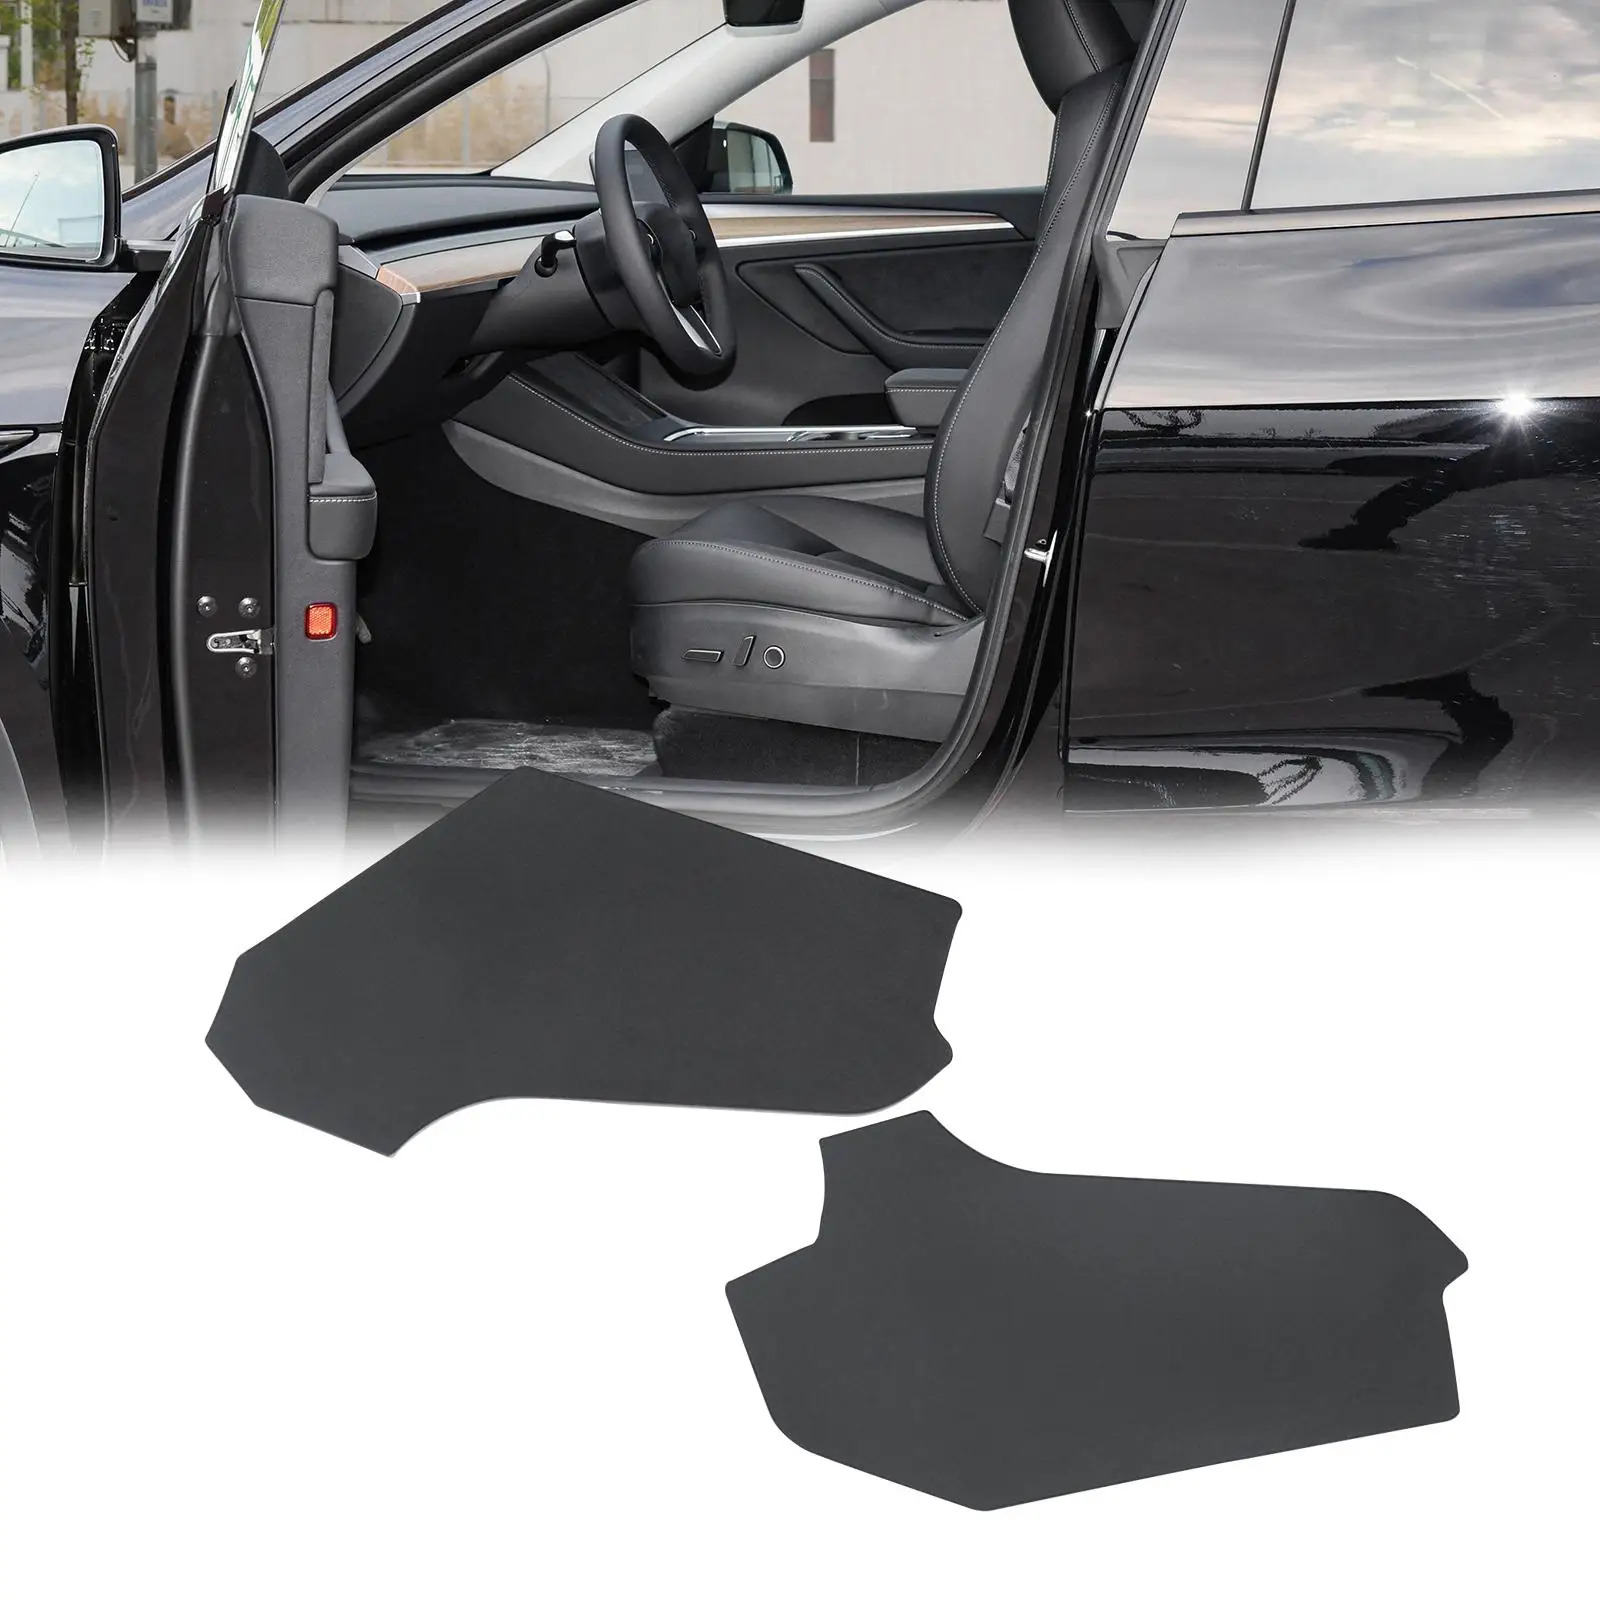 2x Center Console Side Anti  Replaces Spare Parts Anti Dust  Anti Kicking Pad Durable for 